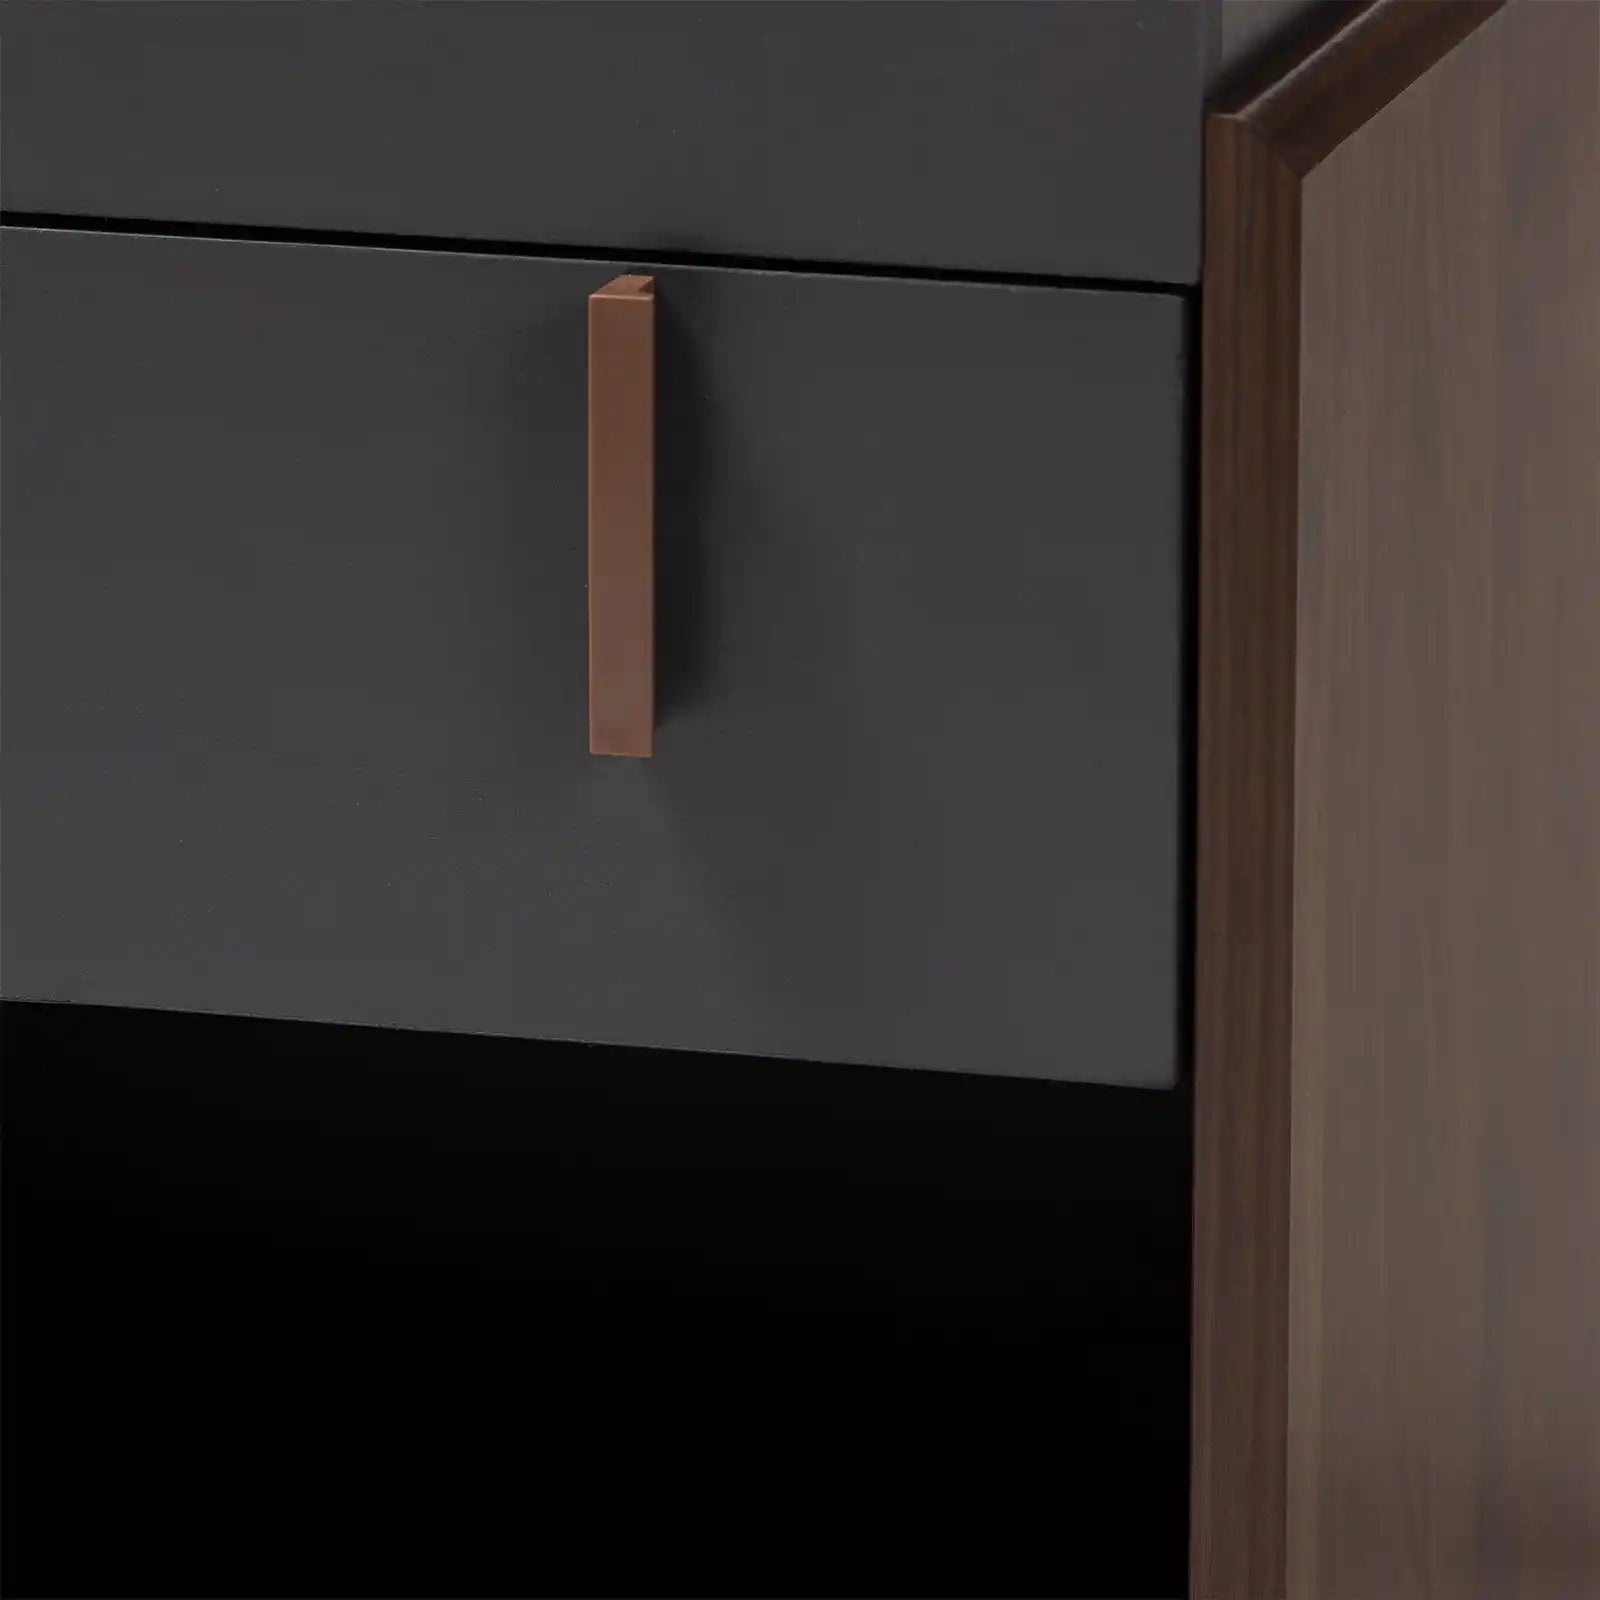 Contemporary Walnut and Deep Gray Nightstand for Bedroom